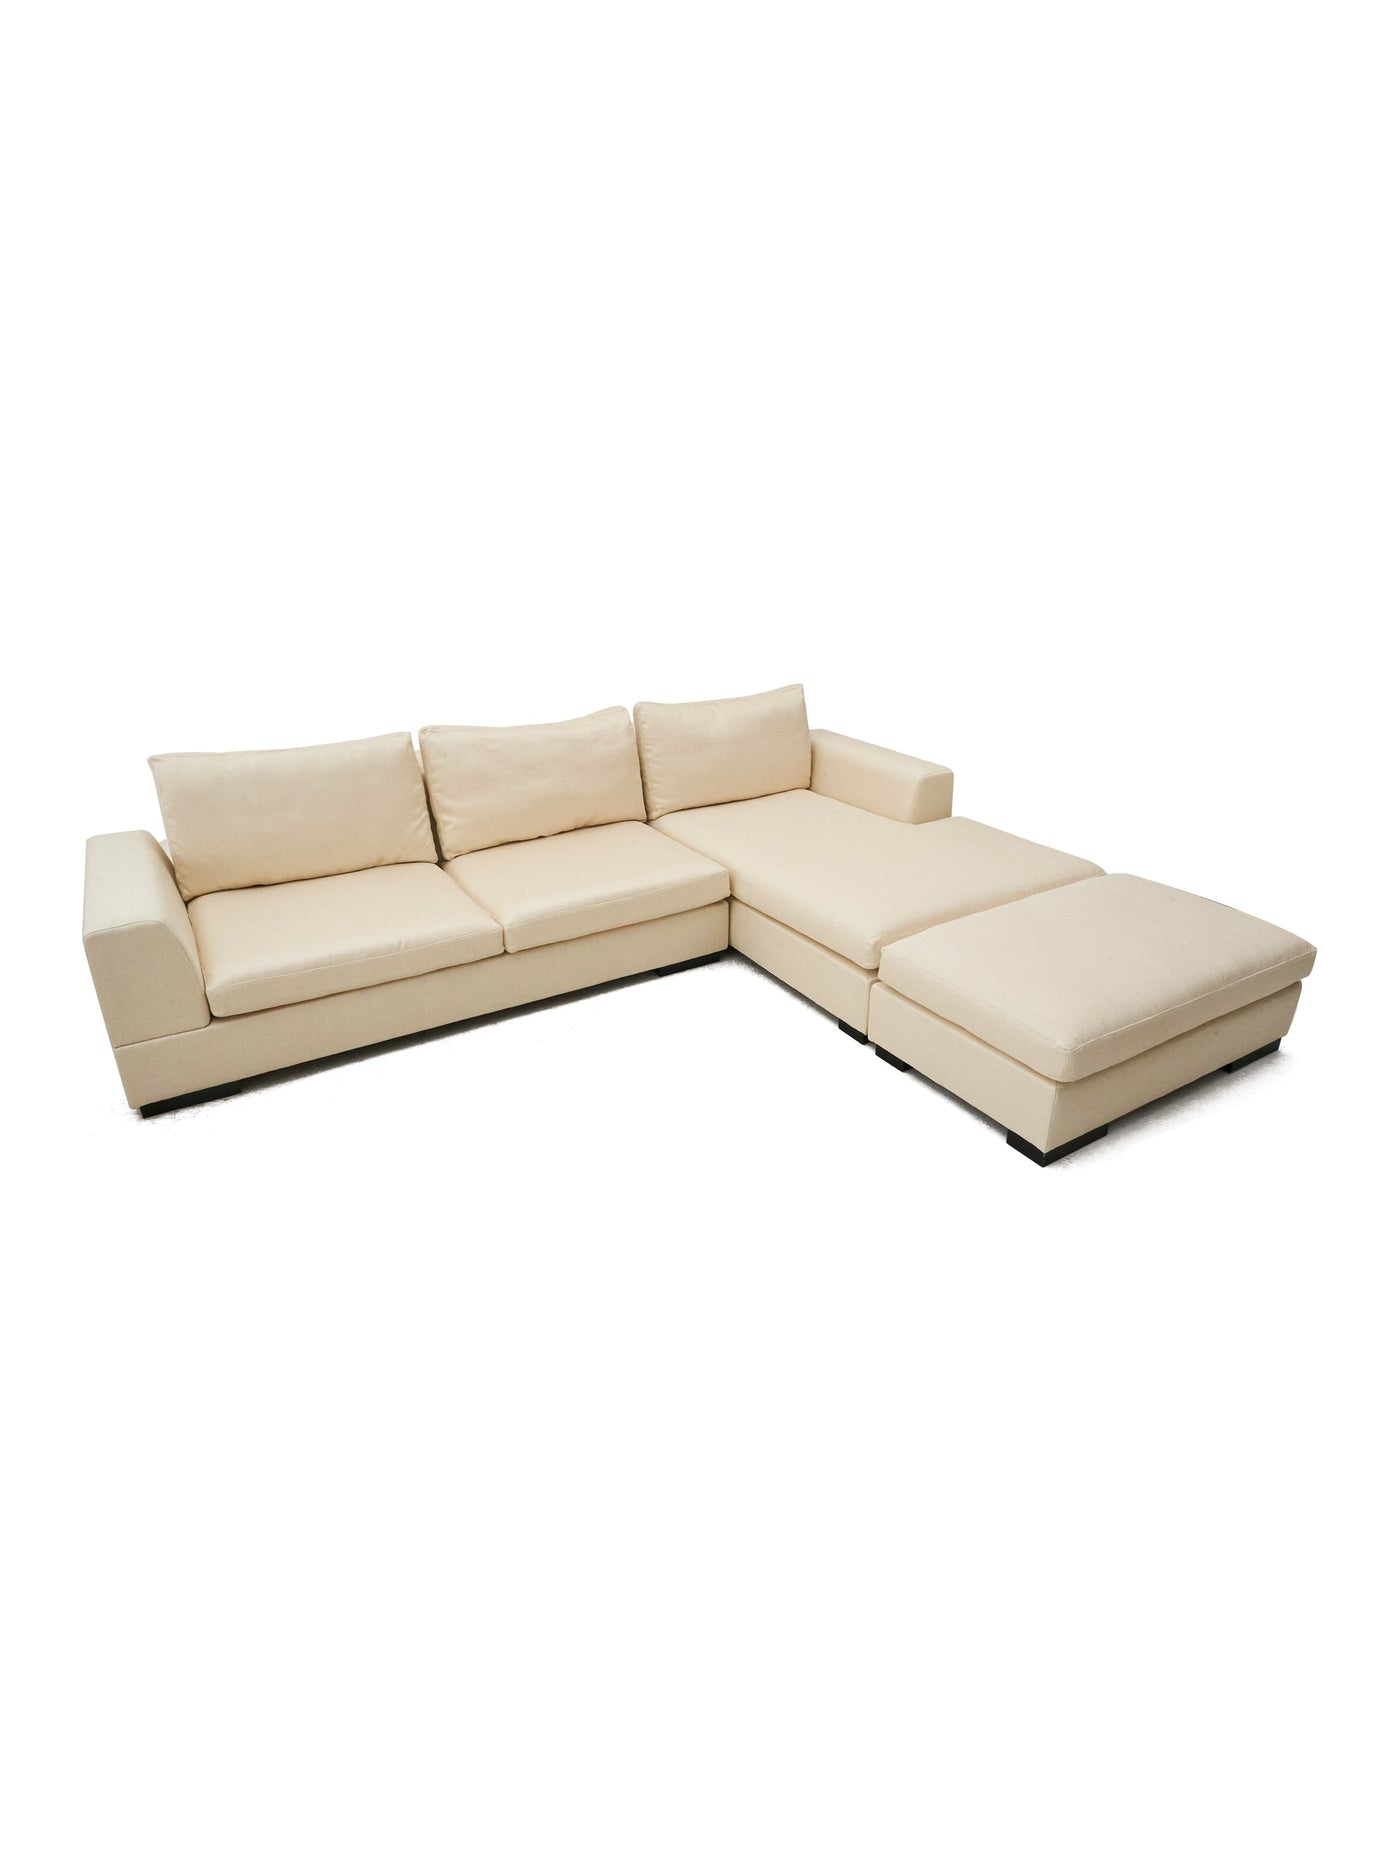 L-Shaped Sectional Sofa and Ottoman in Neutral